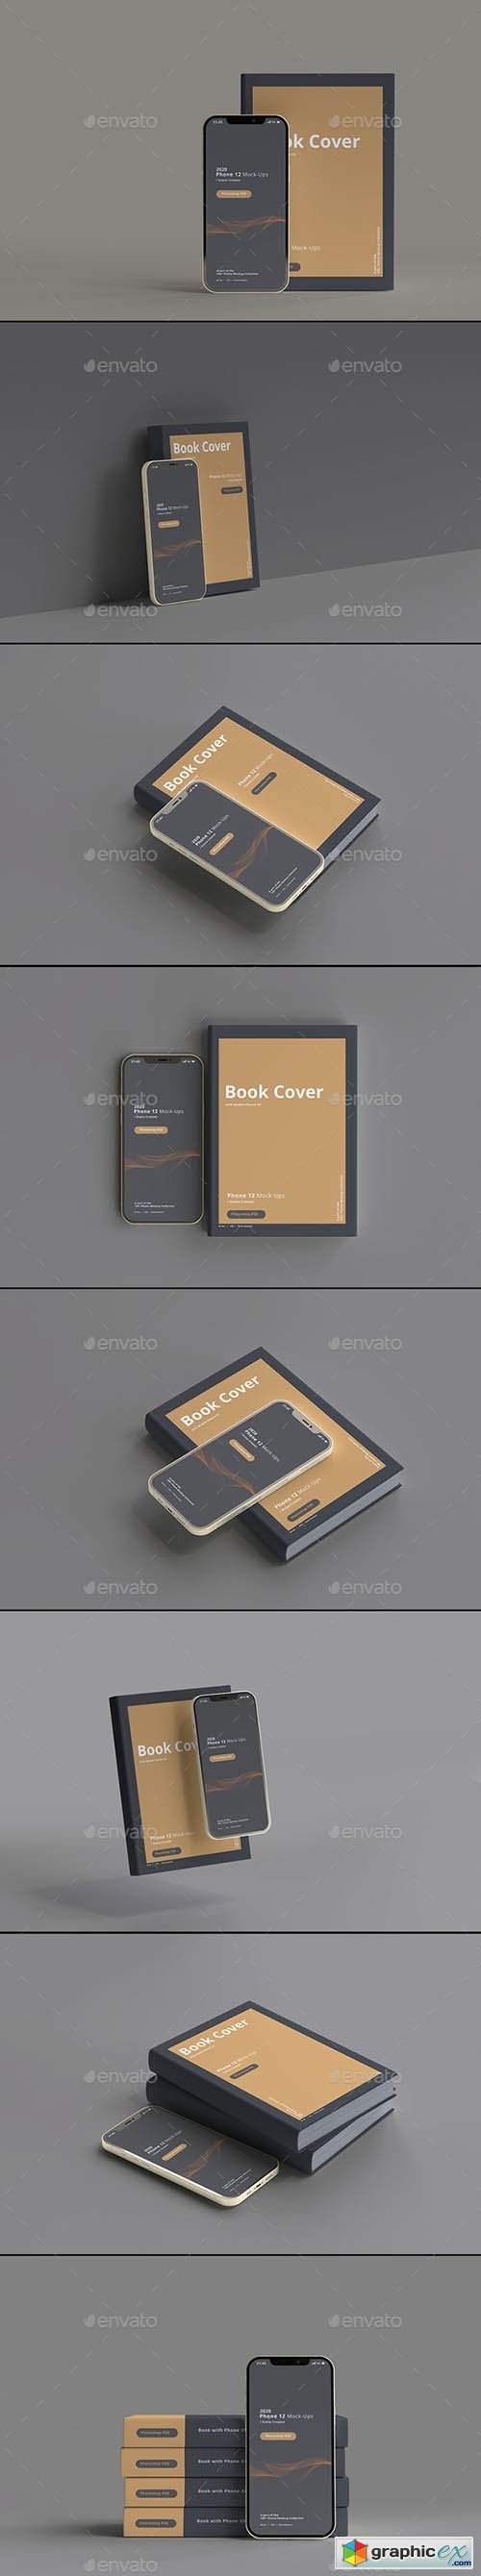 2020 Smart Phone 12 Mockups with Book Cover